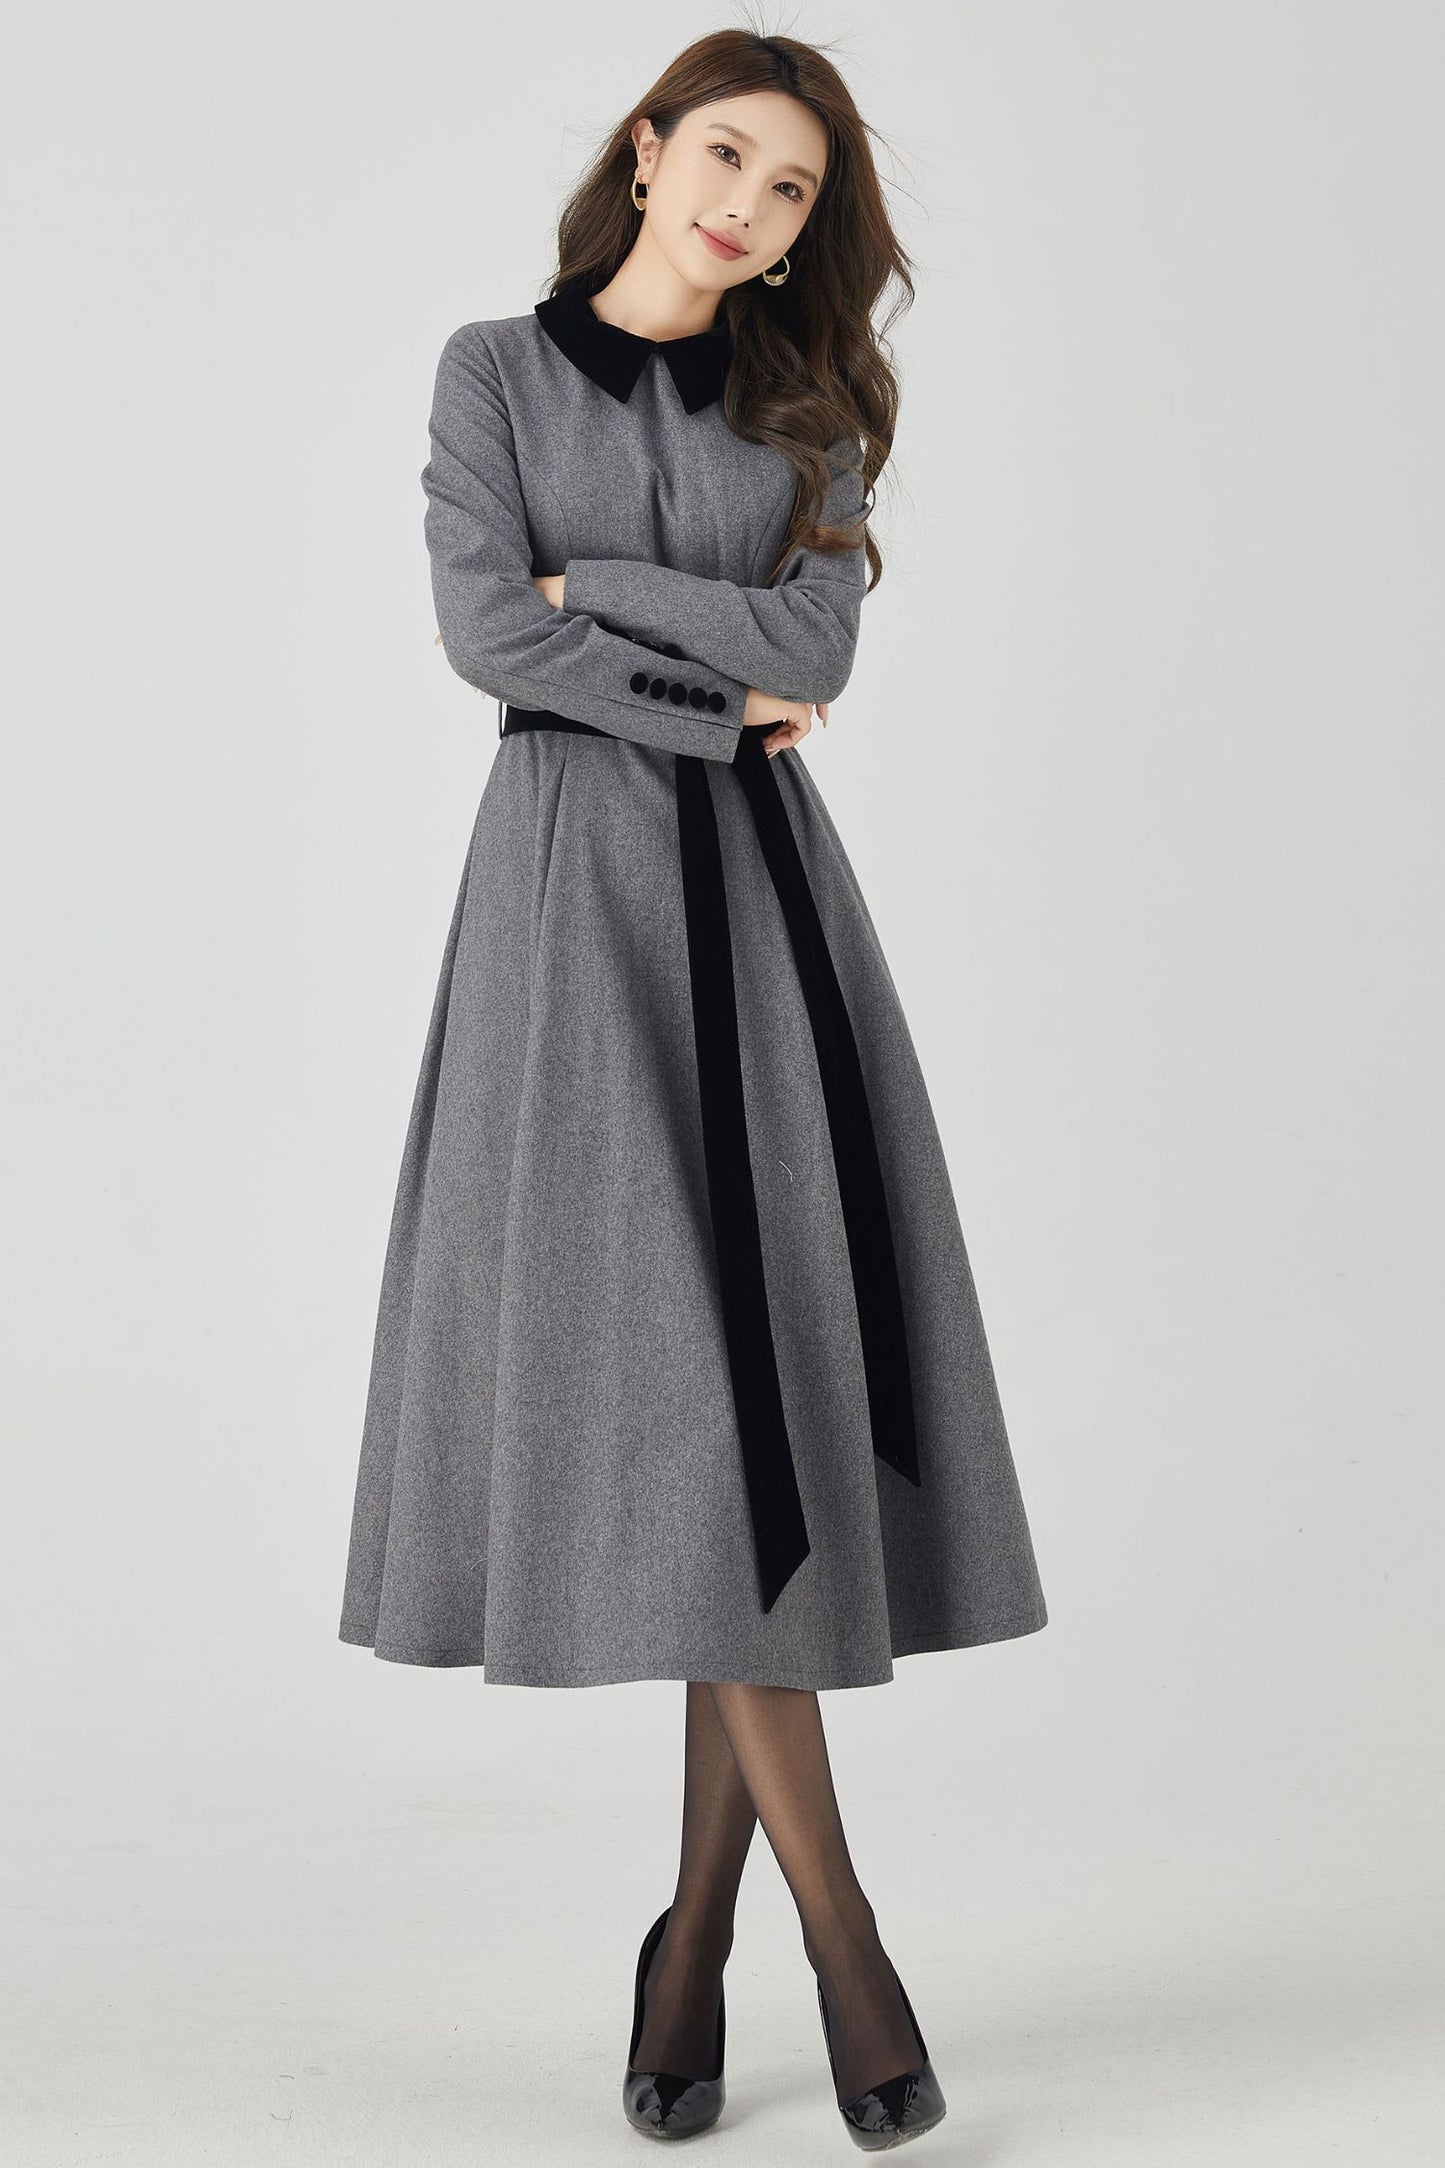 Gray Swing Fit and Flare Wool Dress 4524